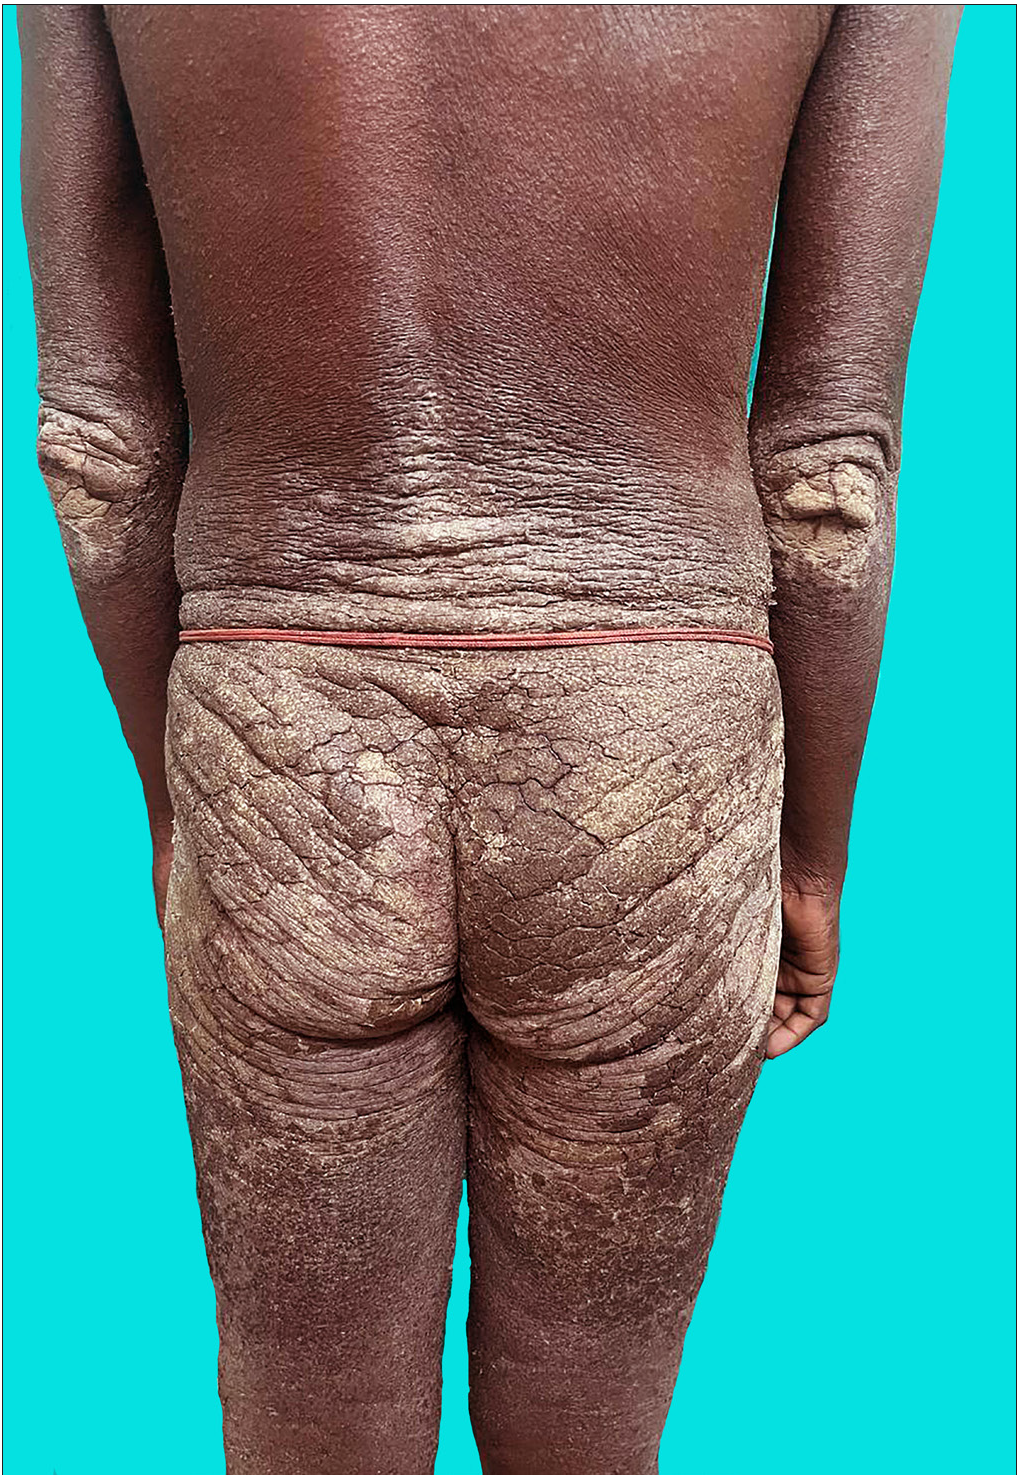 Multiple hyperkeratotic and crusted plaques with fissures noted over back, buttocks and bilateral elbows